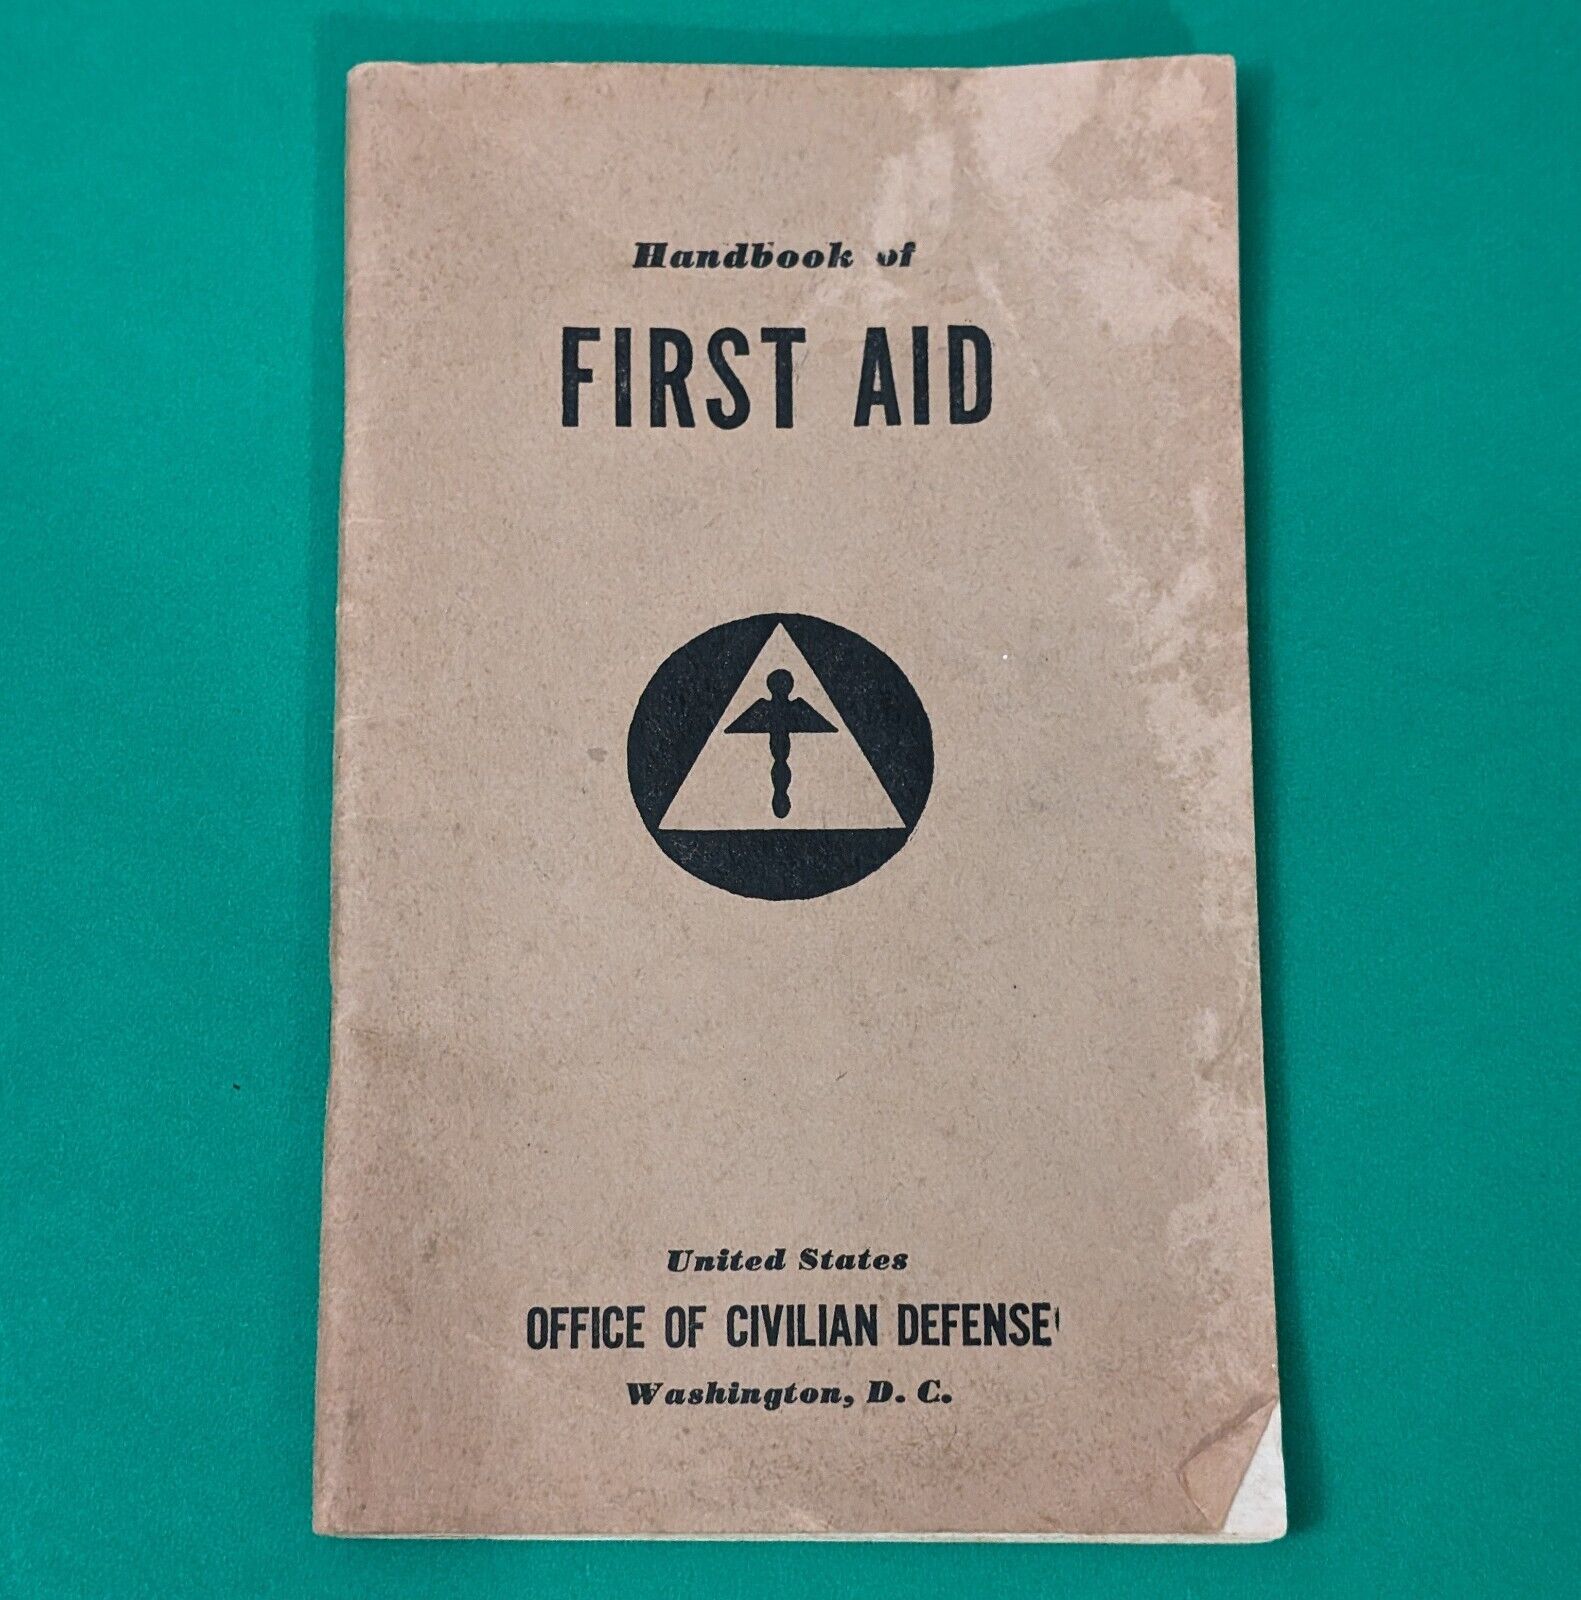 First Aid Handbook 1941 - CIvilian Defense - WWII Home Front Red Cross VTG 1940s